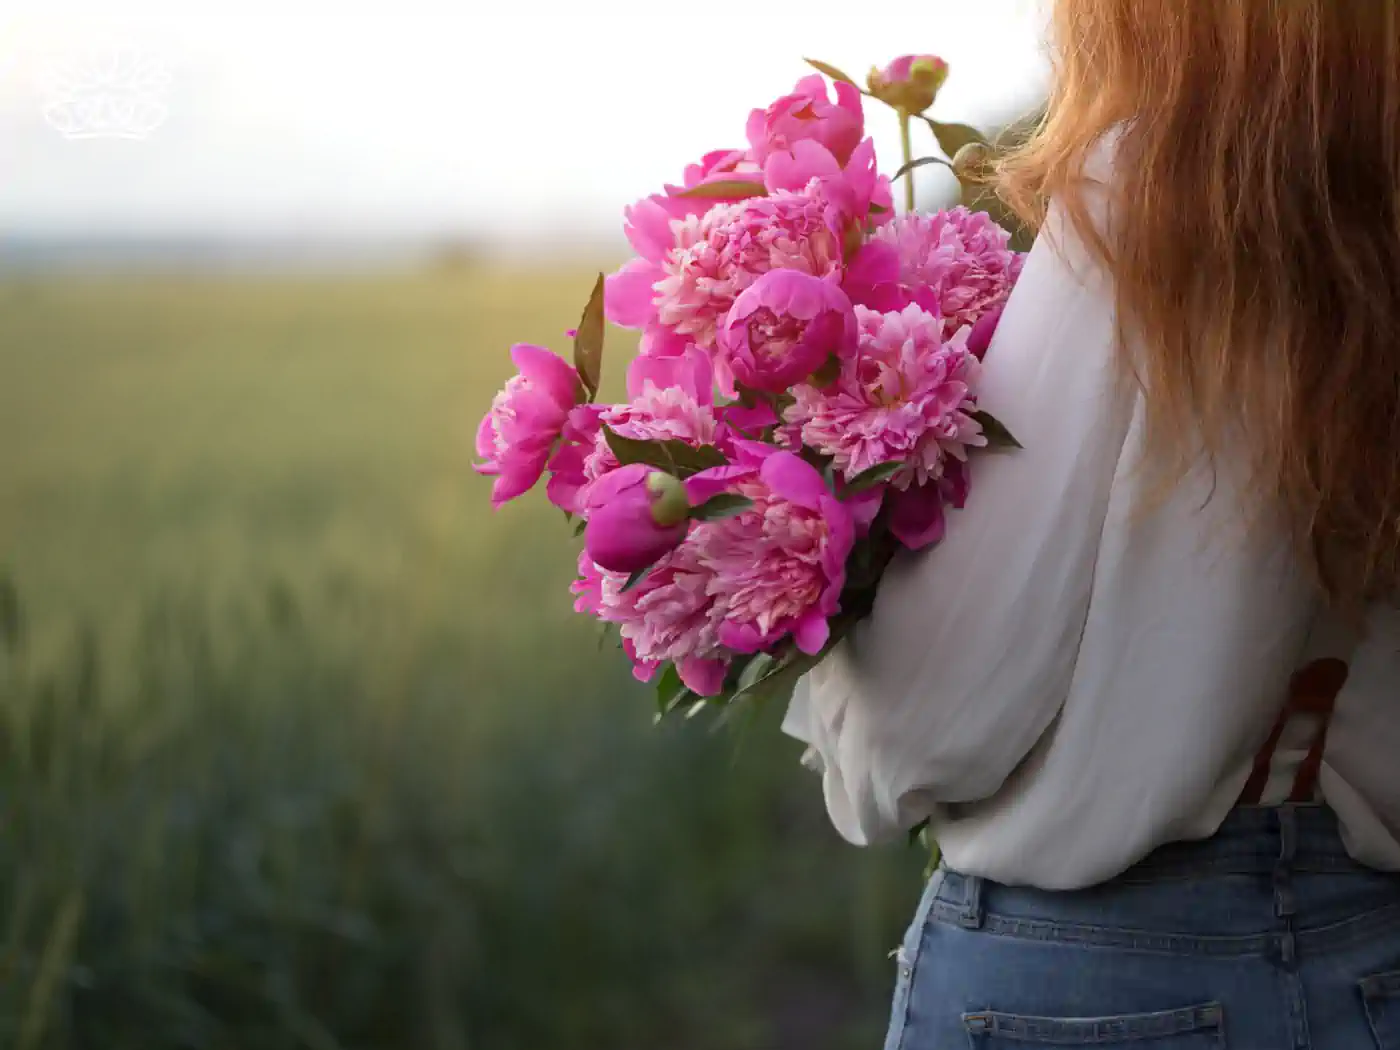 A woman holding a vibrant bouquet of pink peonies in a field. Fabulous Flowers and Gifts - Peonies Collection